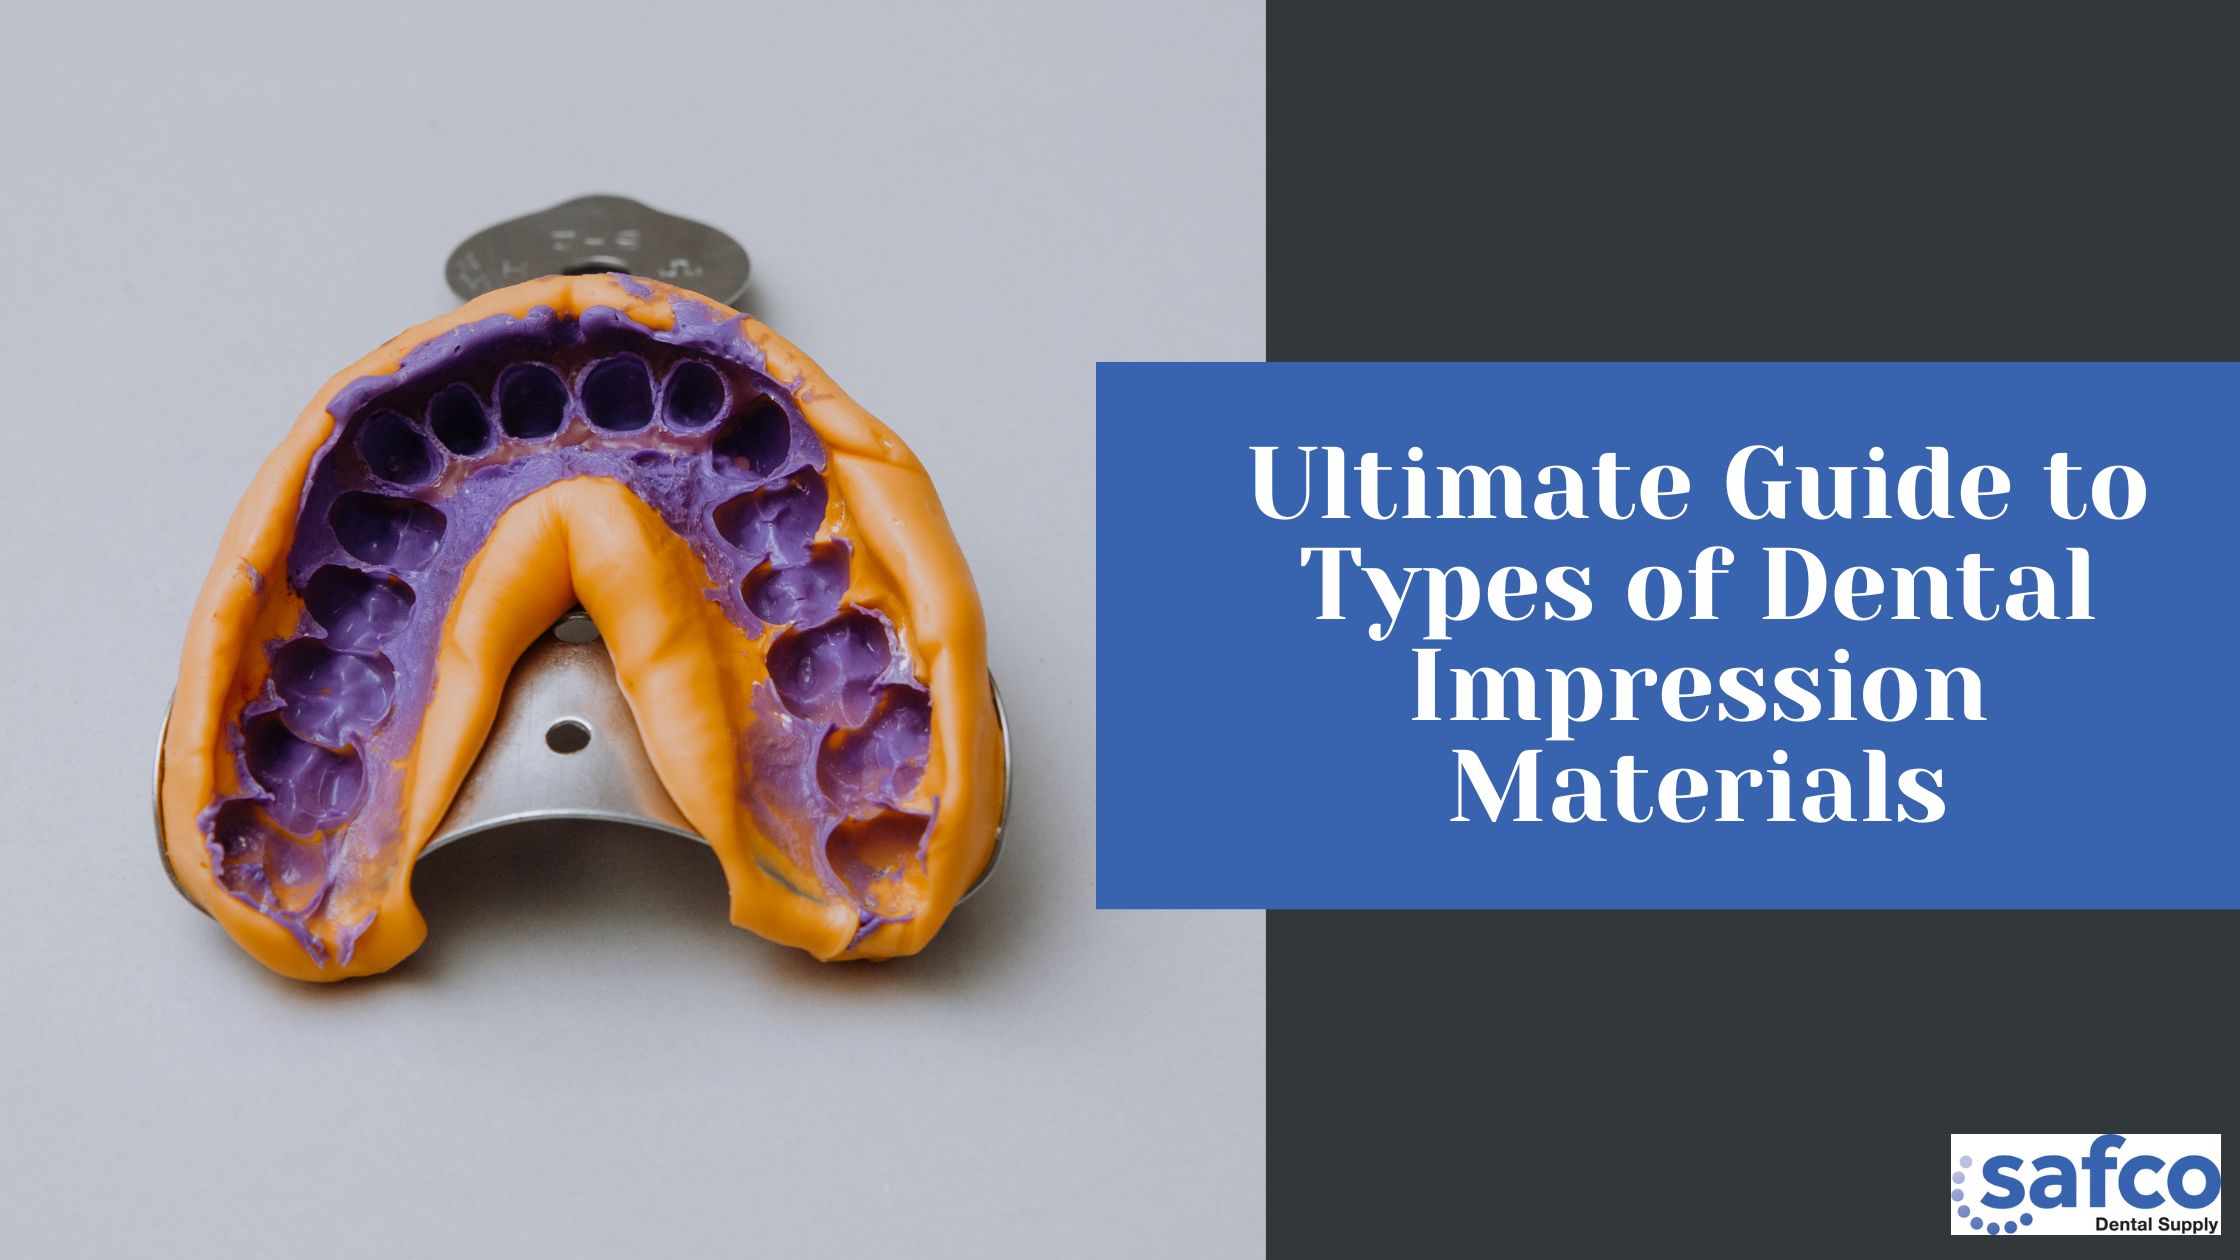 Ultimate Guide to Types of Dental Impression Materials